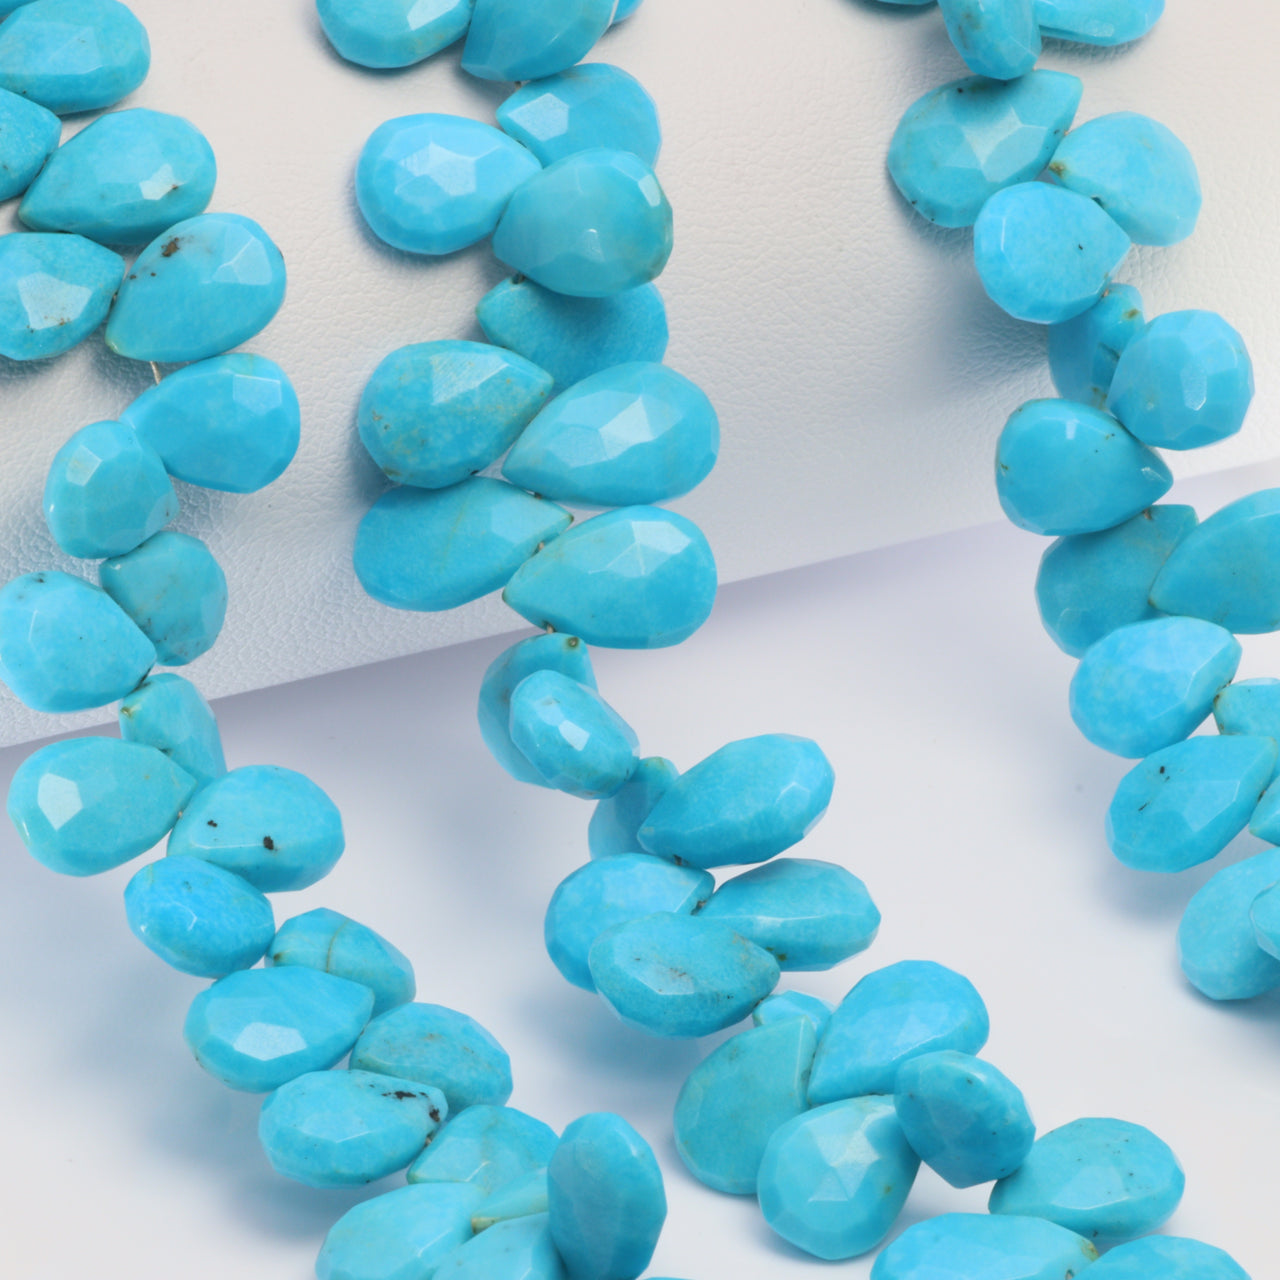 Natural Blue Turquoise 10x7mm Faceted Pear Shaped Briolettes